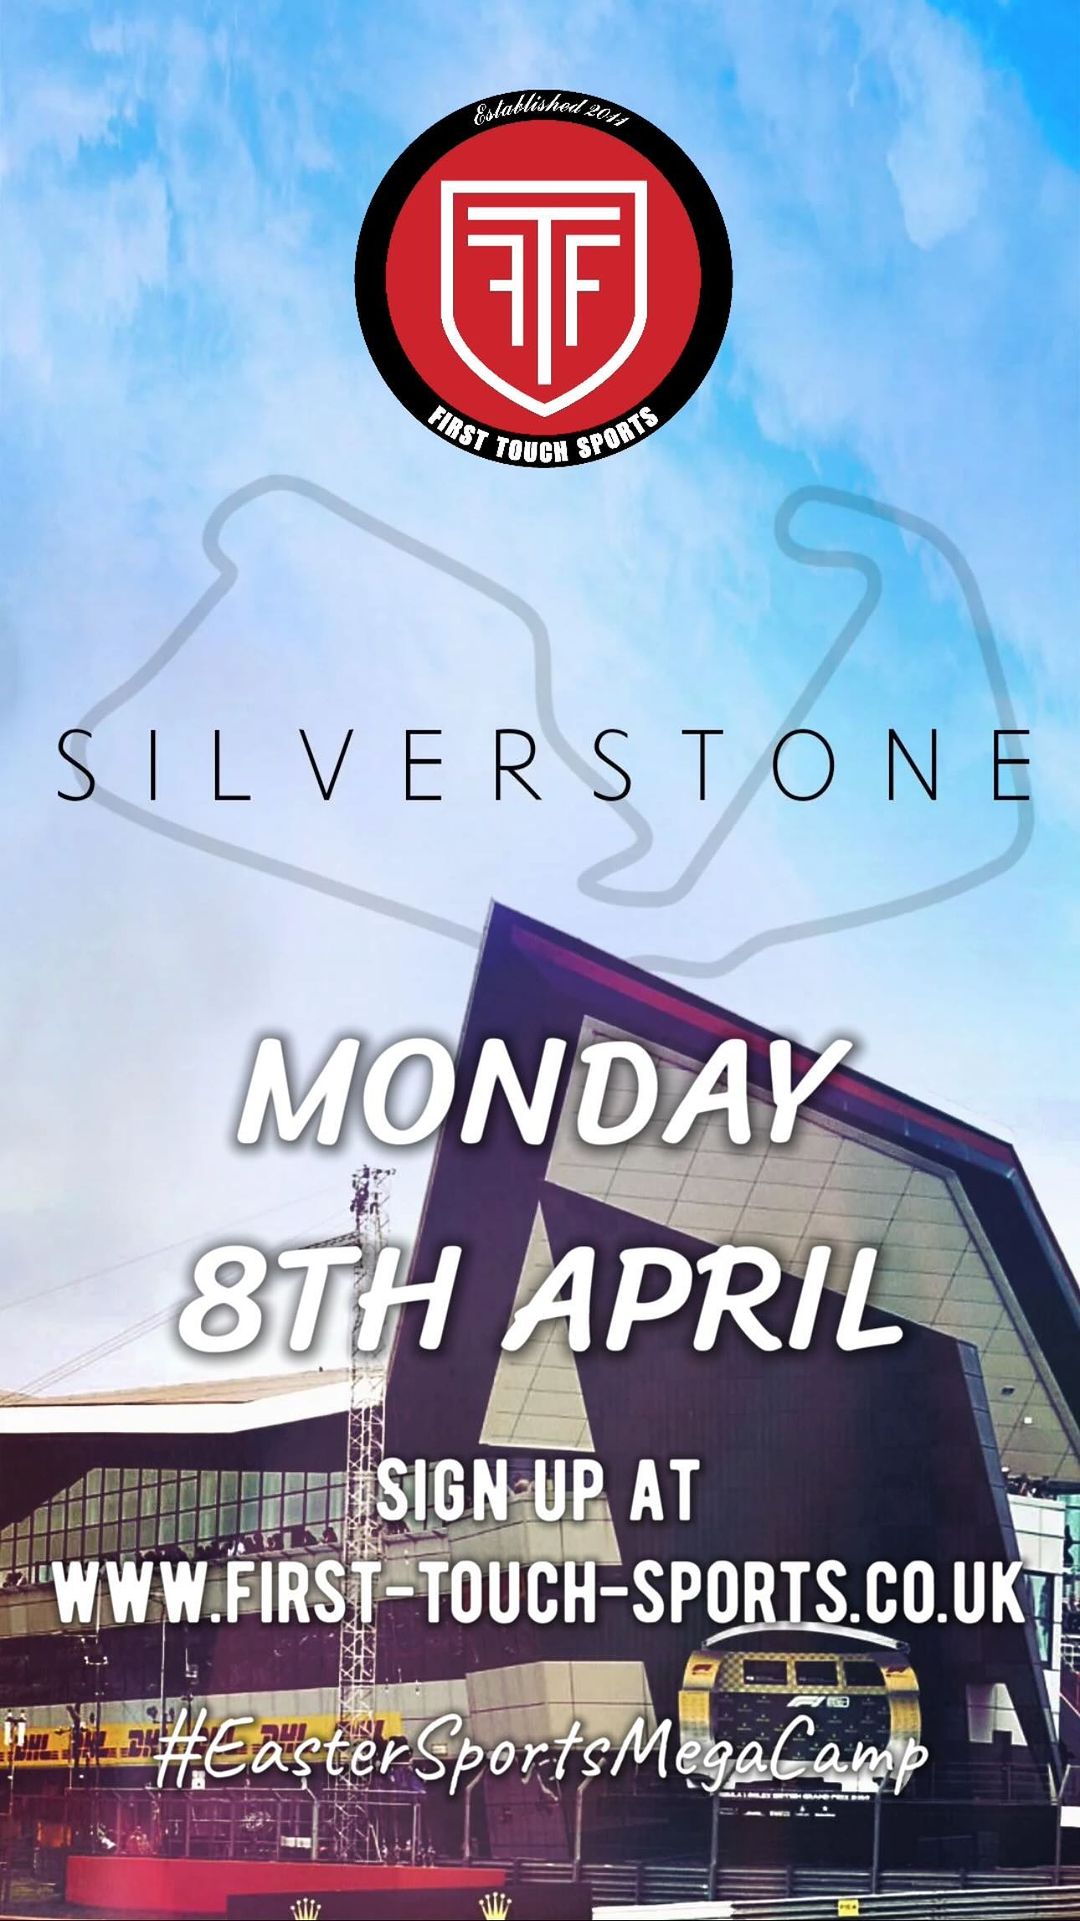 🏁 SILVERSTONE CIRCUIT TOUR 🏁 With the new F1 season starting this weekend,...